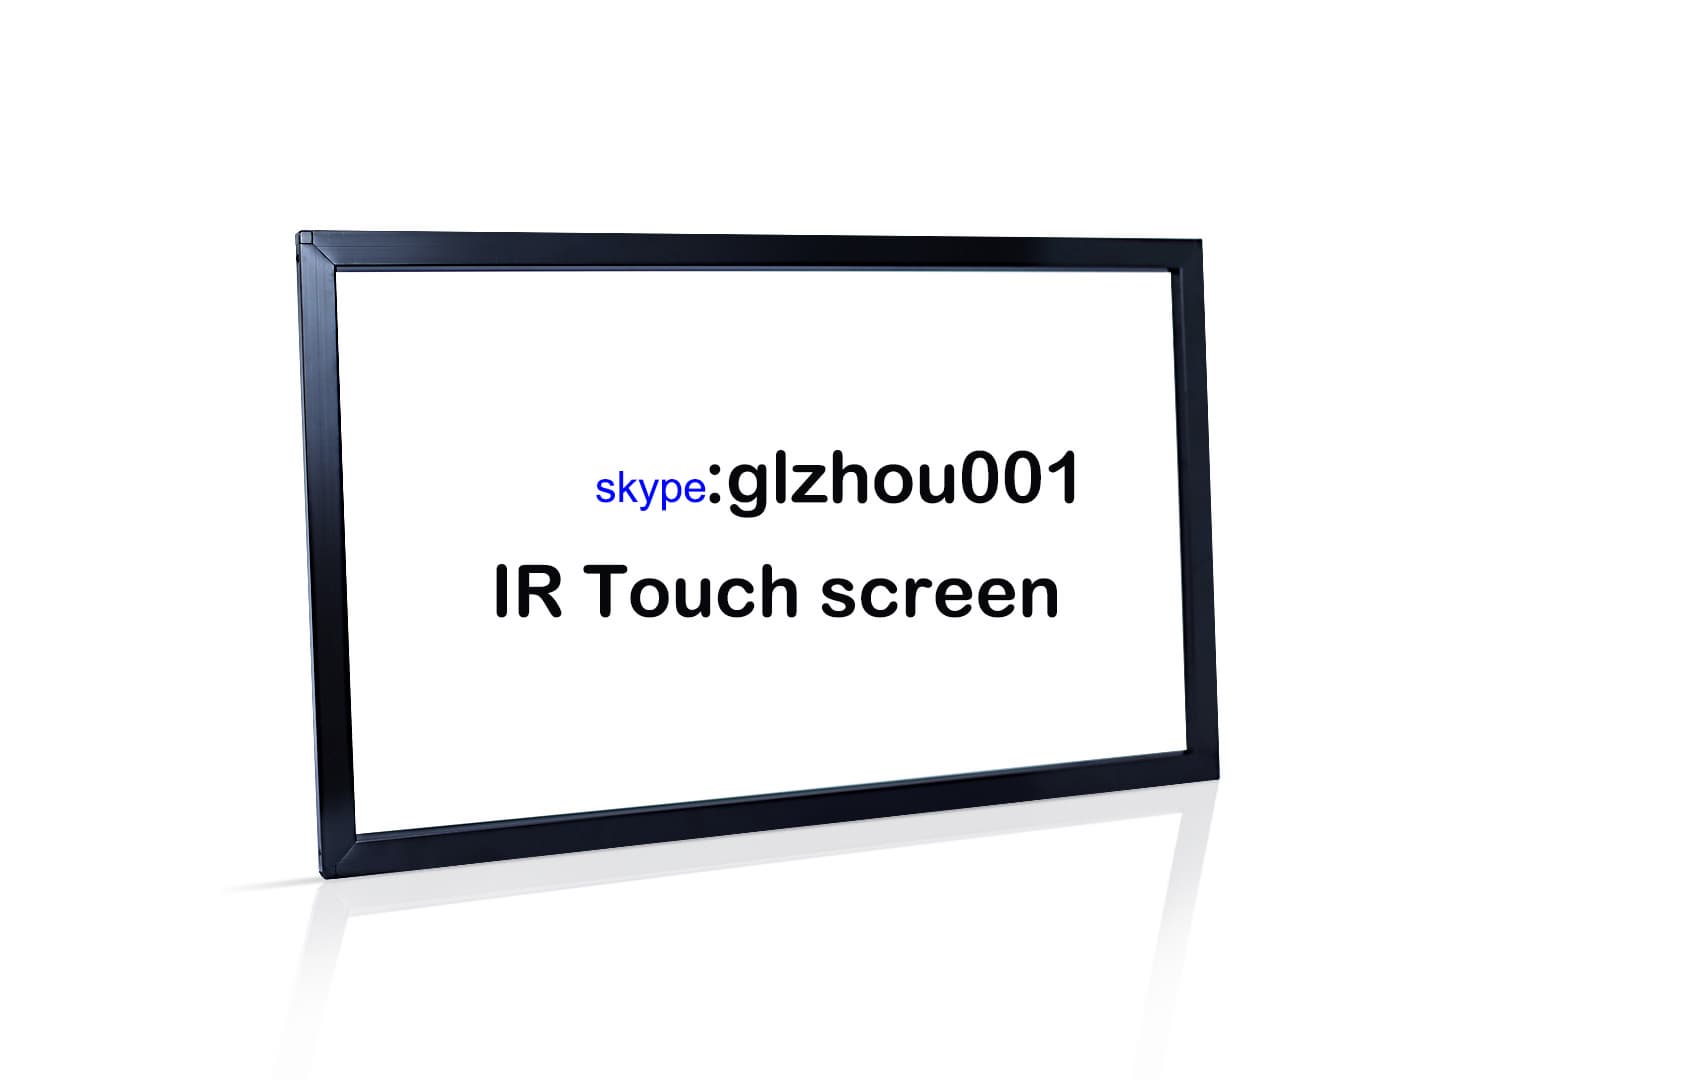 22_23_24_27 inch IR Touch screens  overlay USB _RS232  kit